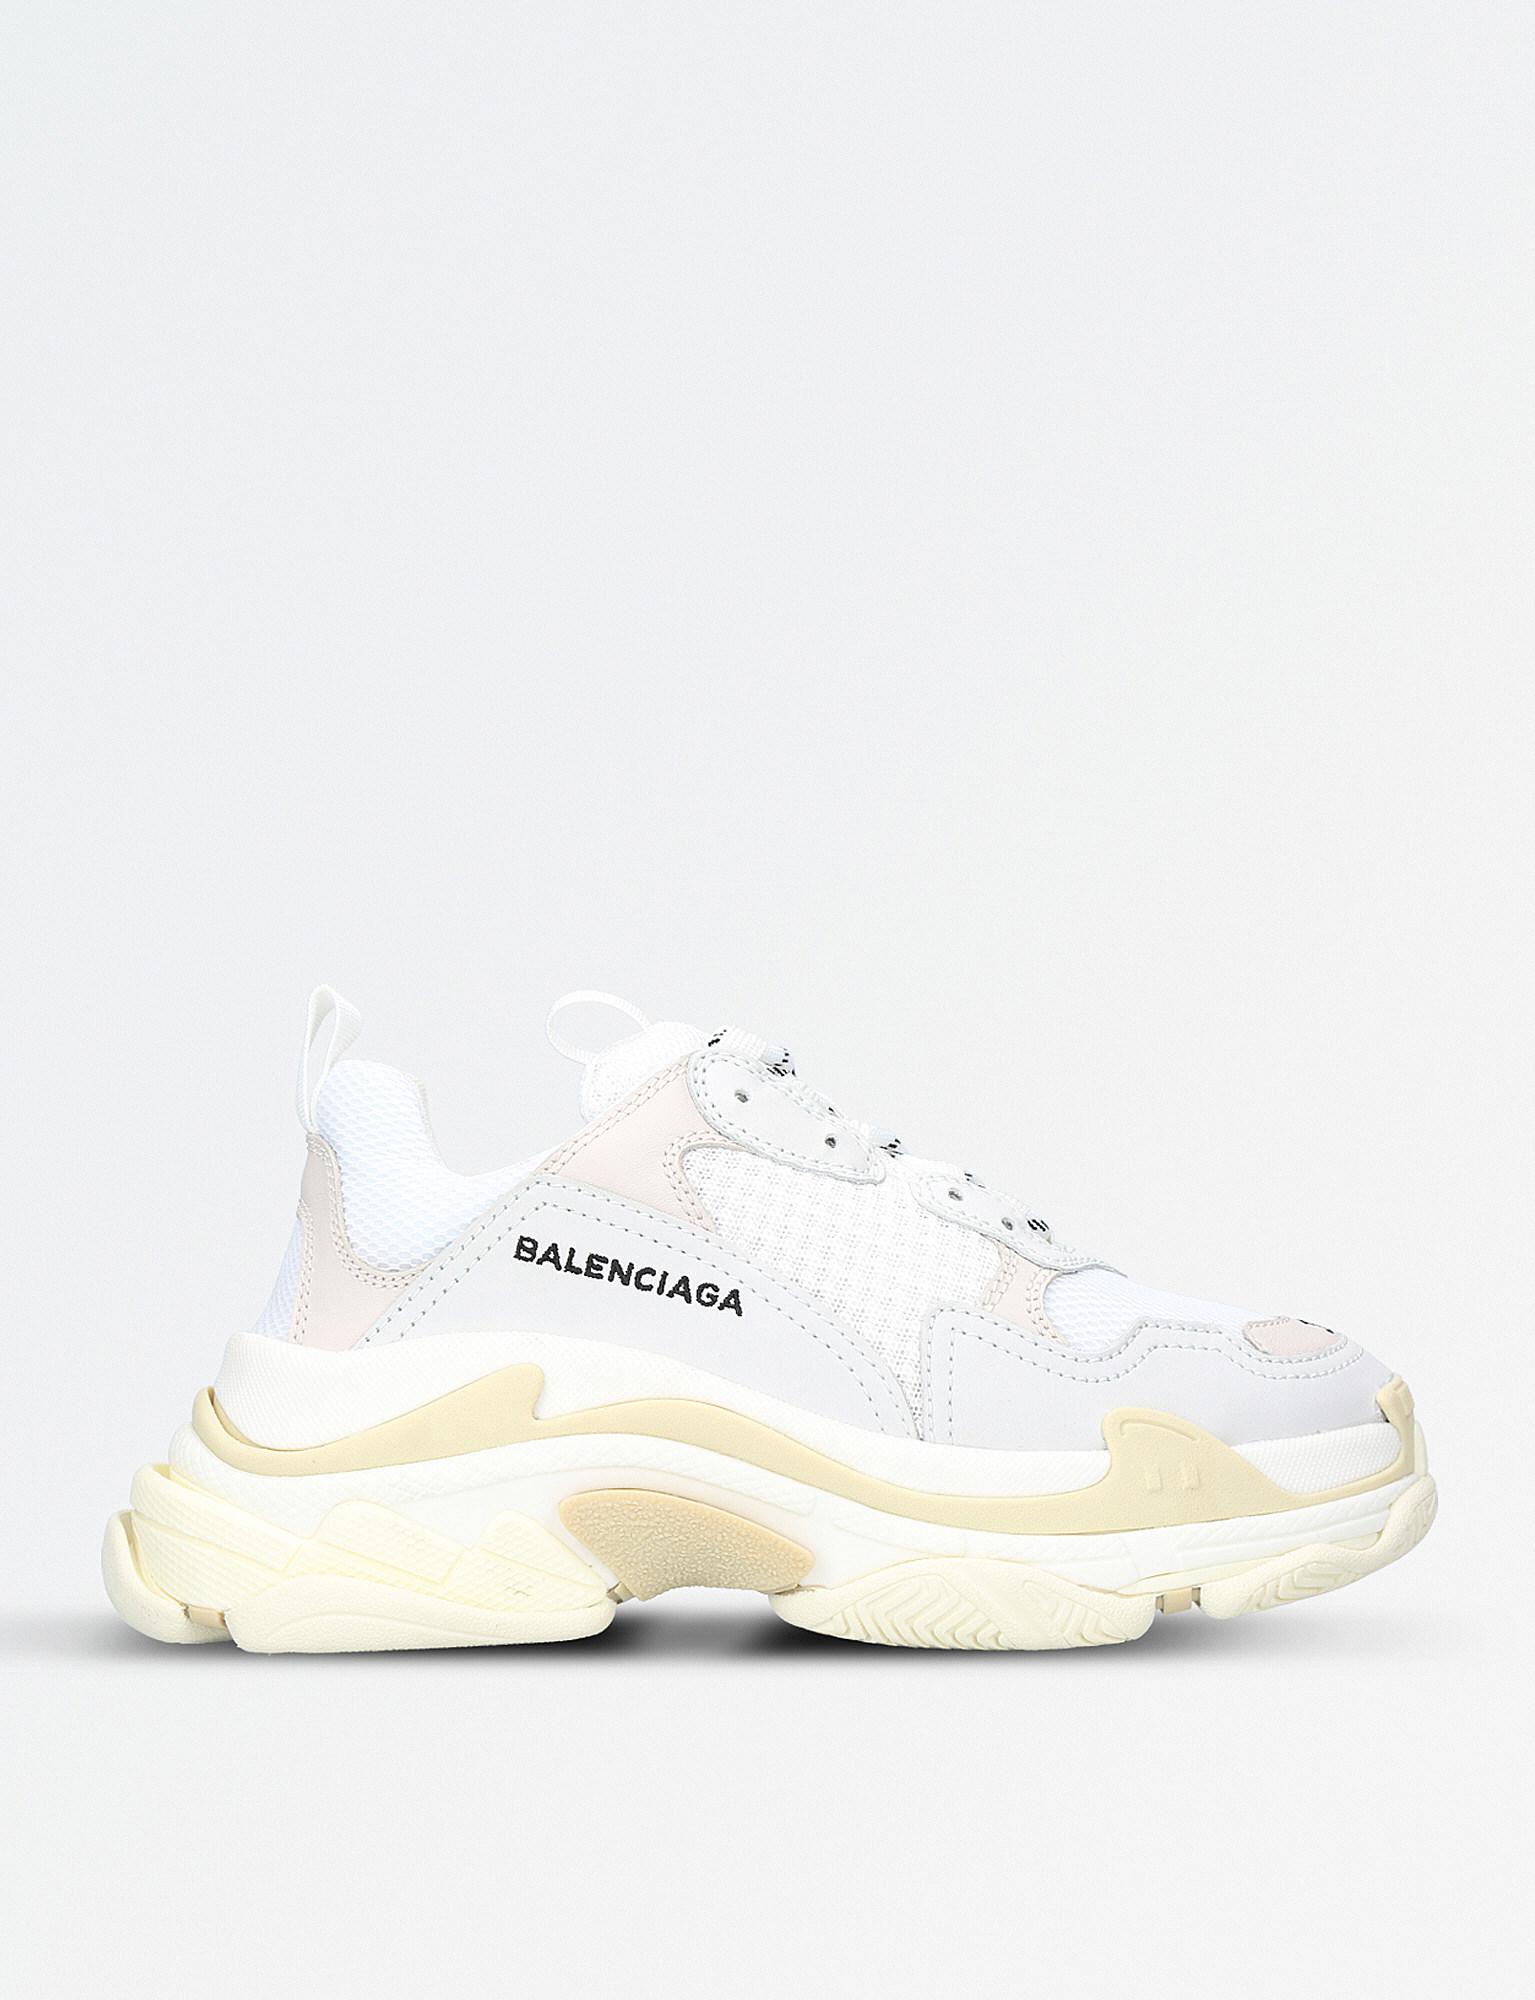 Balenciaga triple s for Sale in West London London Clothes